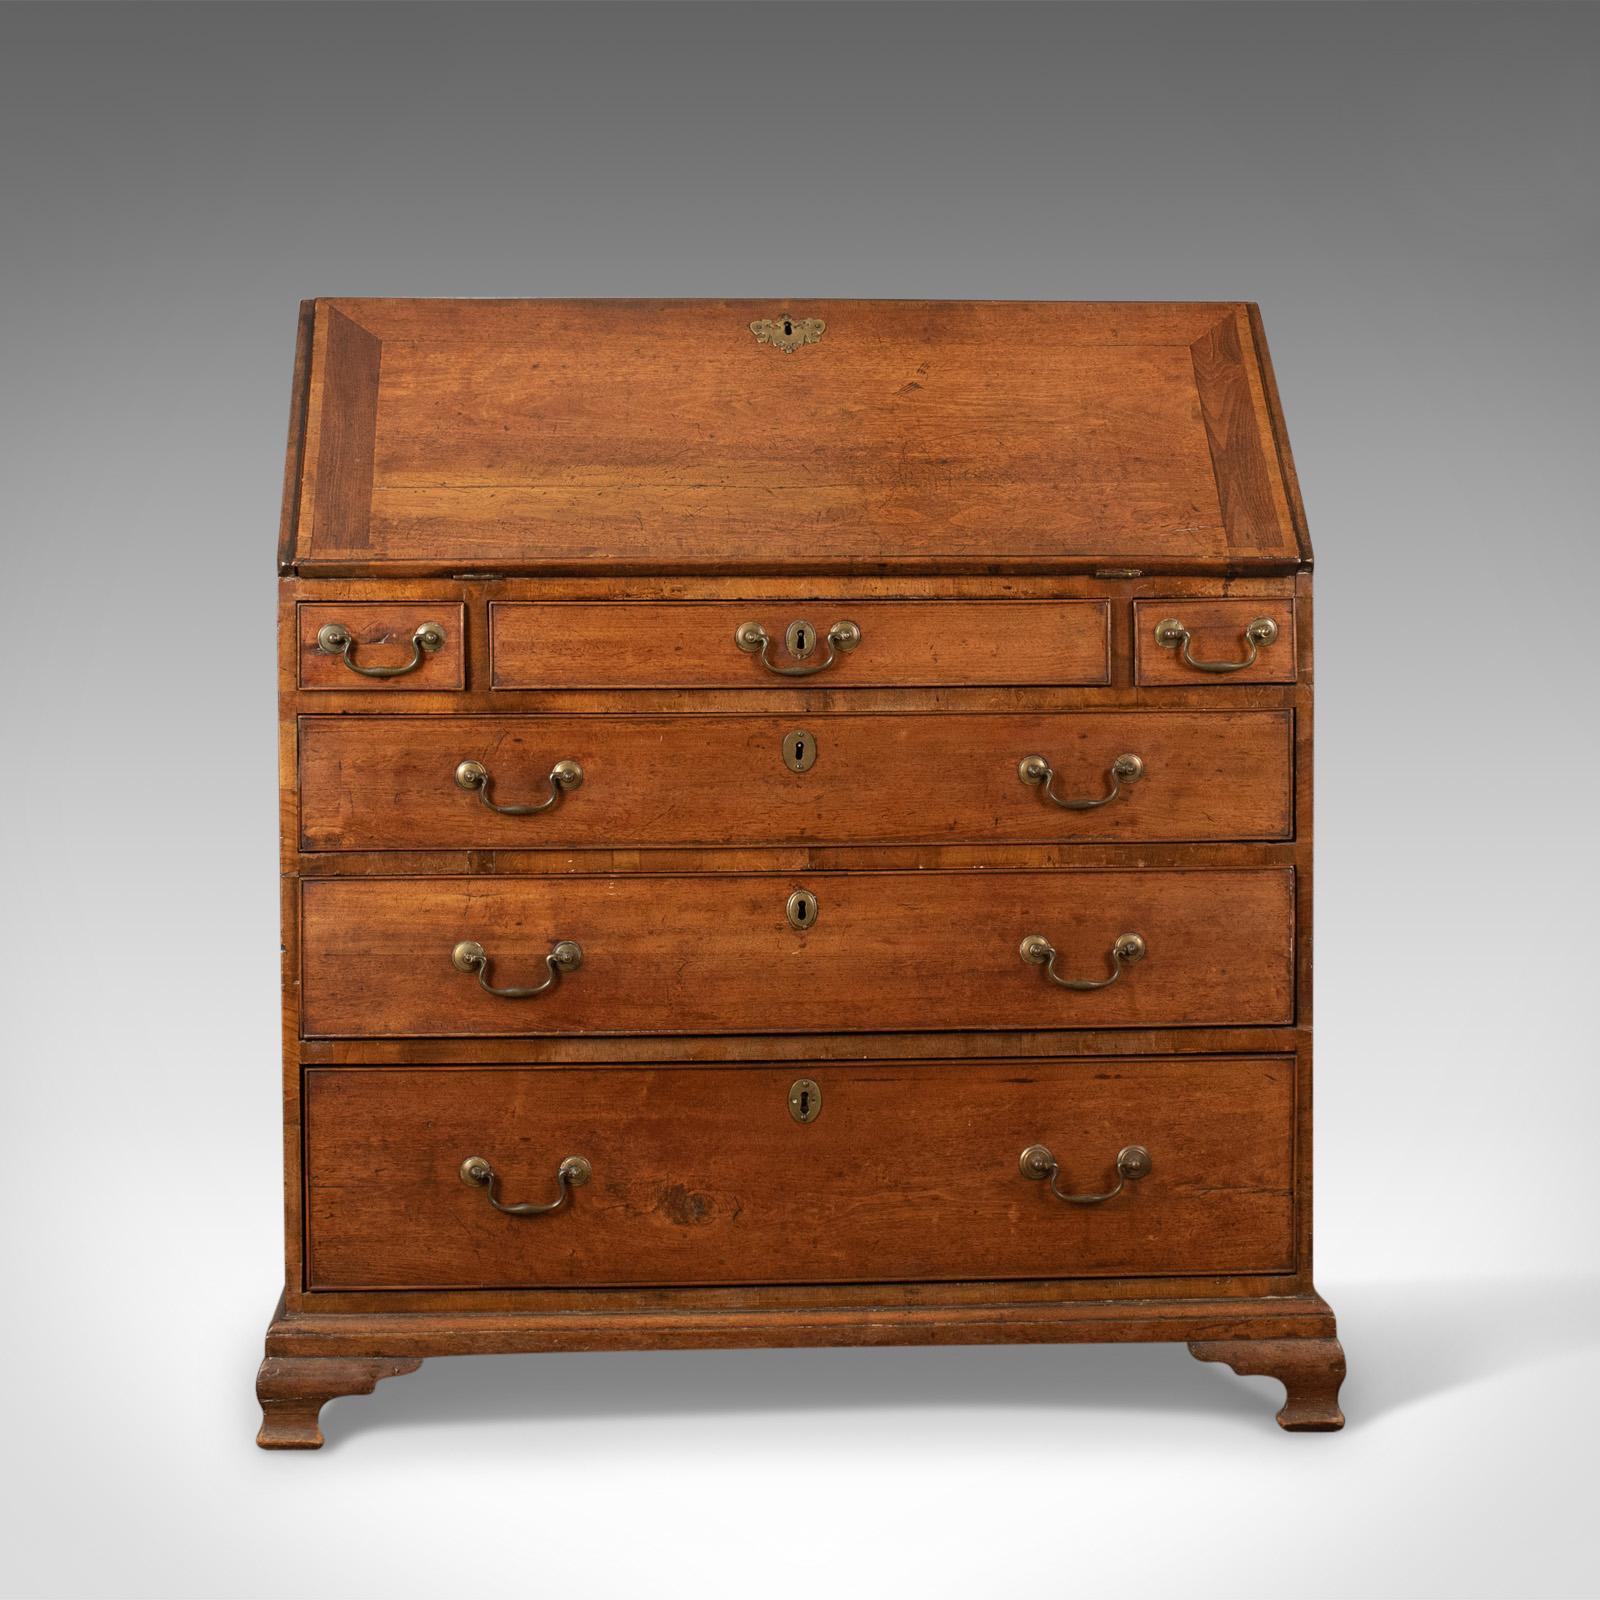 — Complimentary front door shipping to the US, Canada, UK and the EU. Arriving approximately 10 working days from order —

This is an antique bureau in mahogany. An English, Georgian desk featuring secret compartments, dating to circa